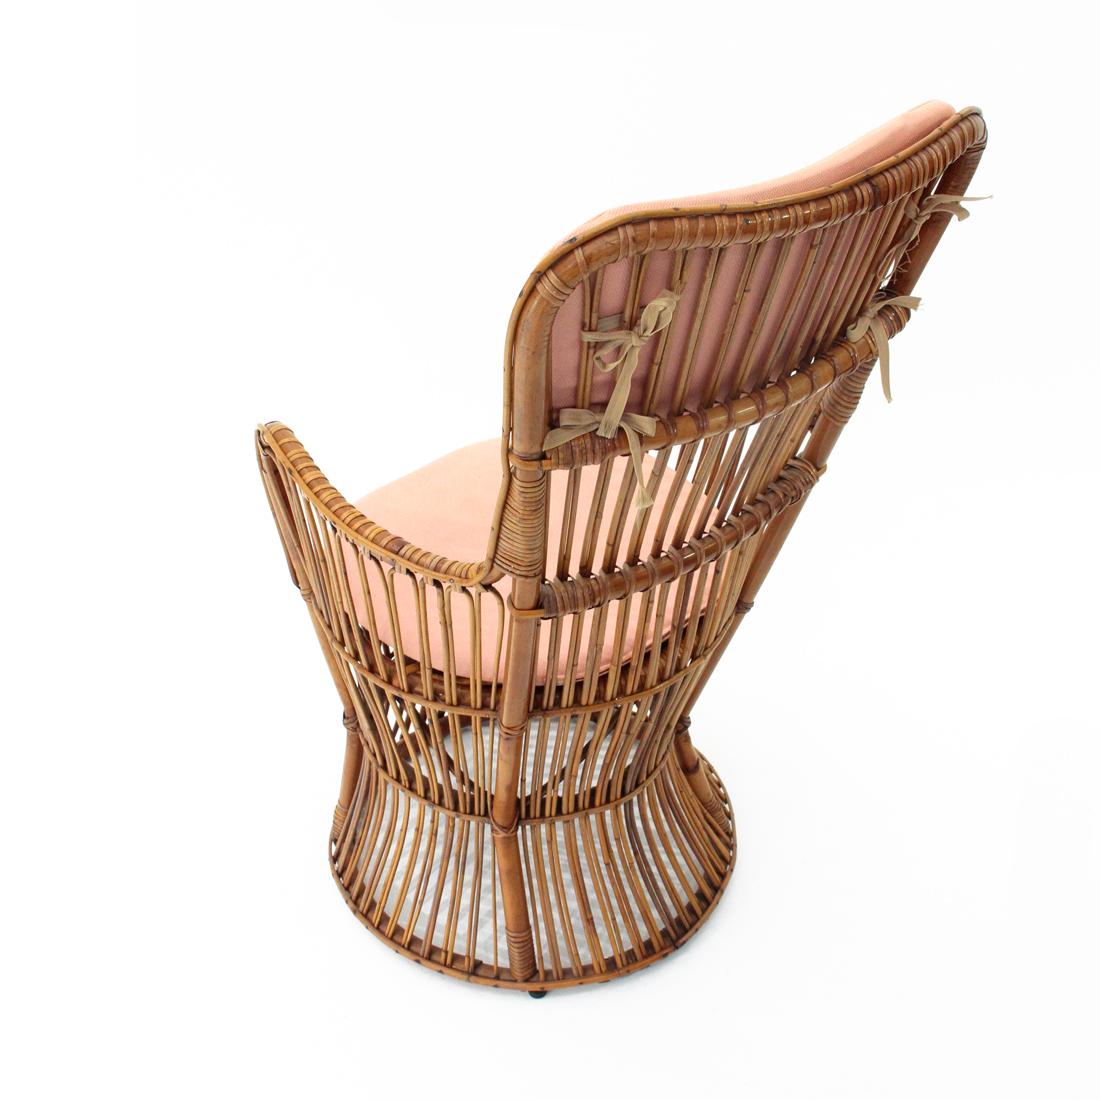 Italian Midcentury Rattan Armchair by Dal Vera, 1950s For Sale 2